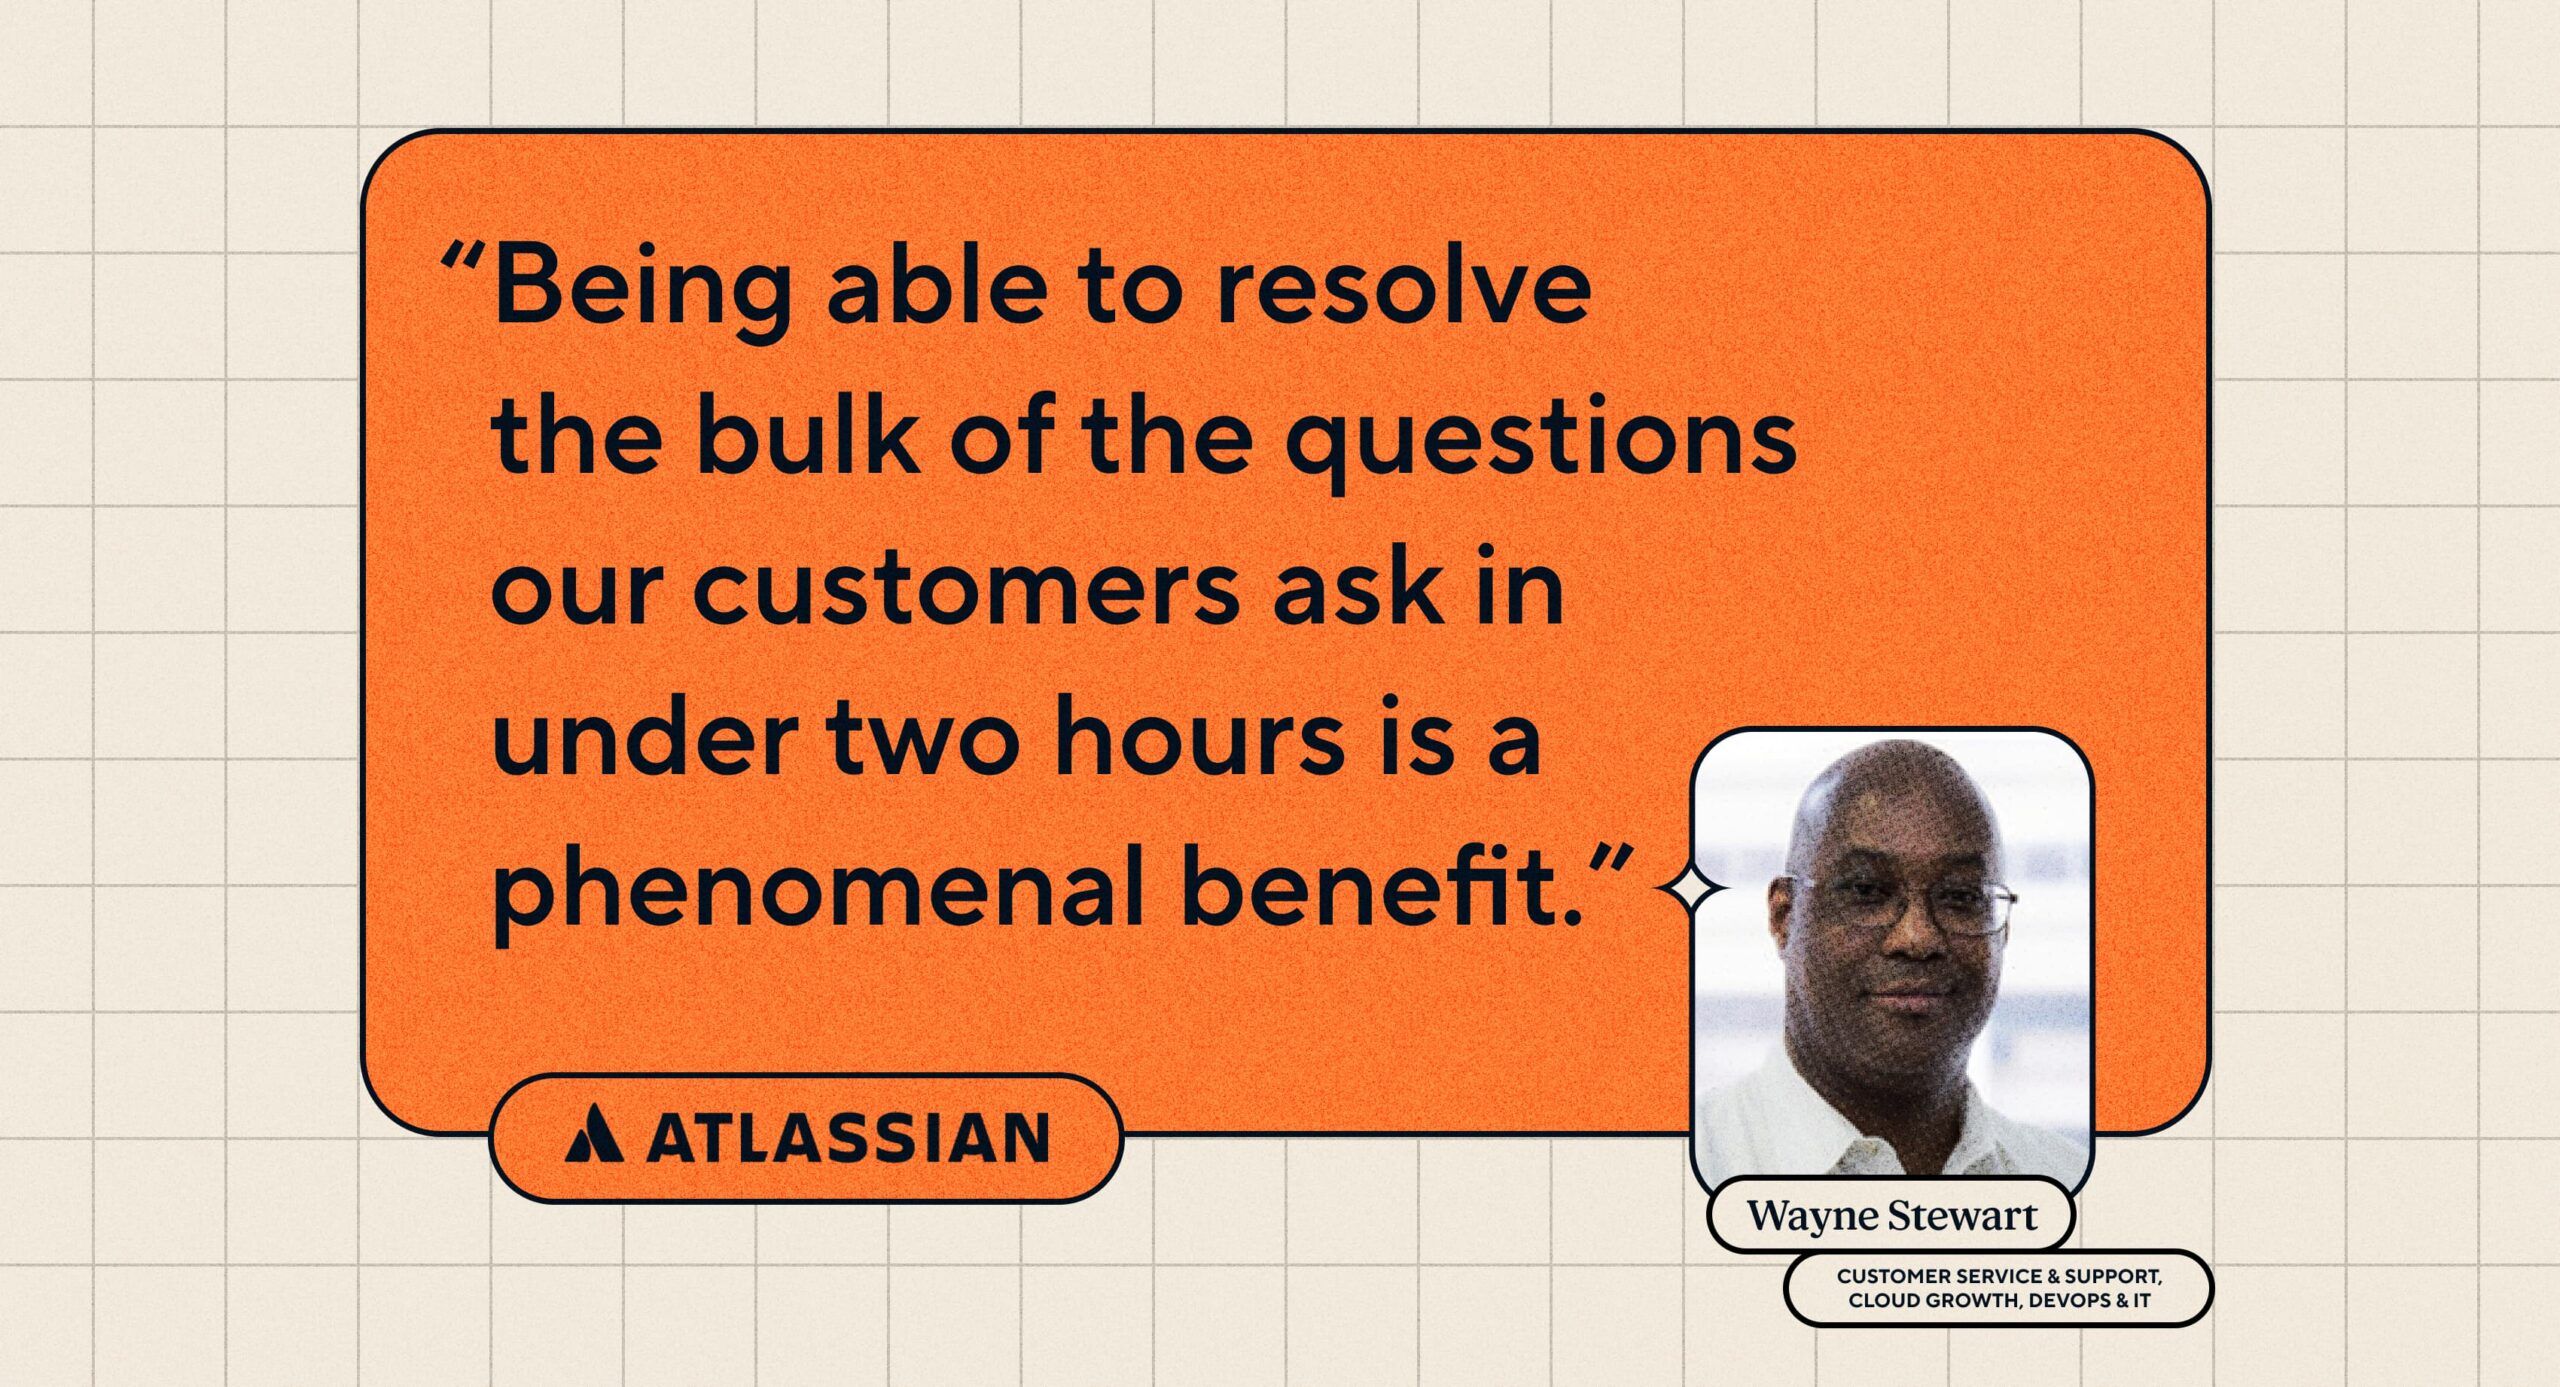 Quote: “Being able to resolve the bulk of the questions our customers ask in under two hours is a phenomenal benefit.” Wayne Stewart, Head of Customer Service and Support, Cloud Growth, DevOps & IT at Atlassian.